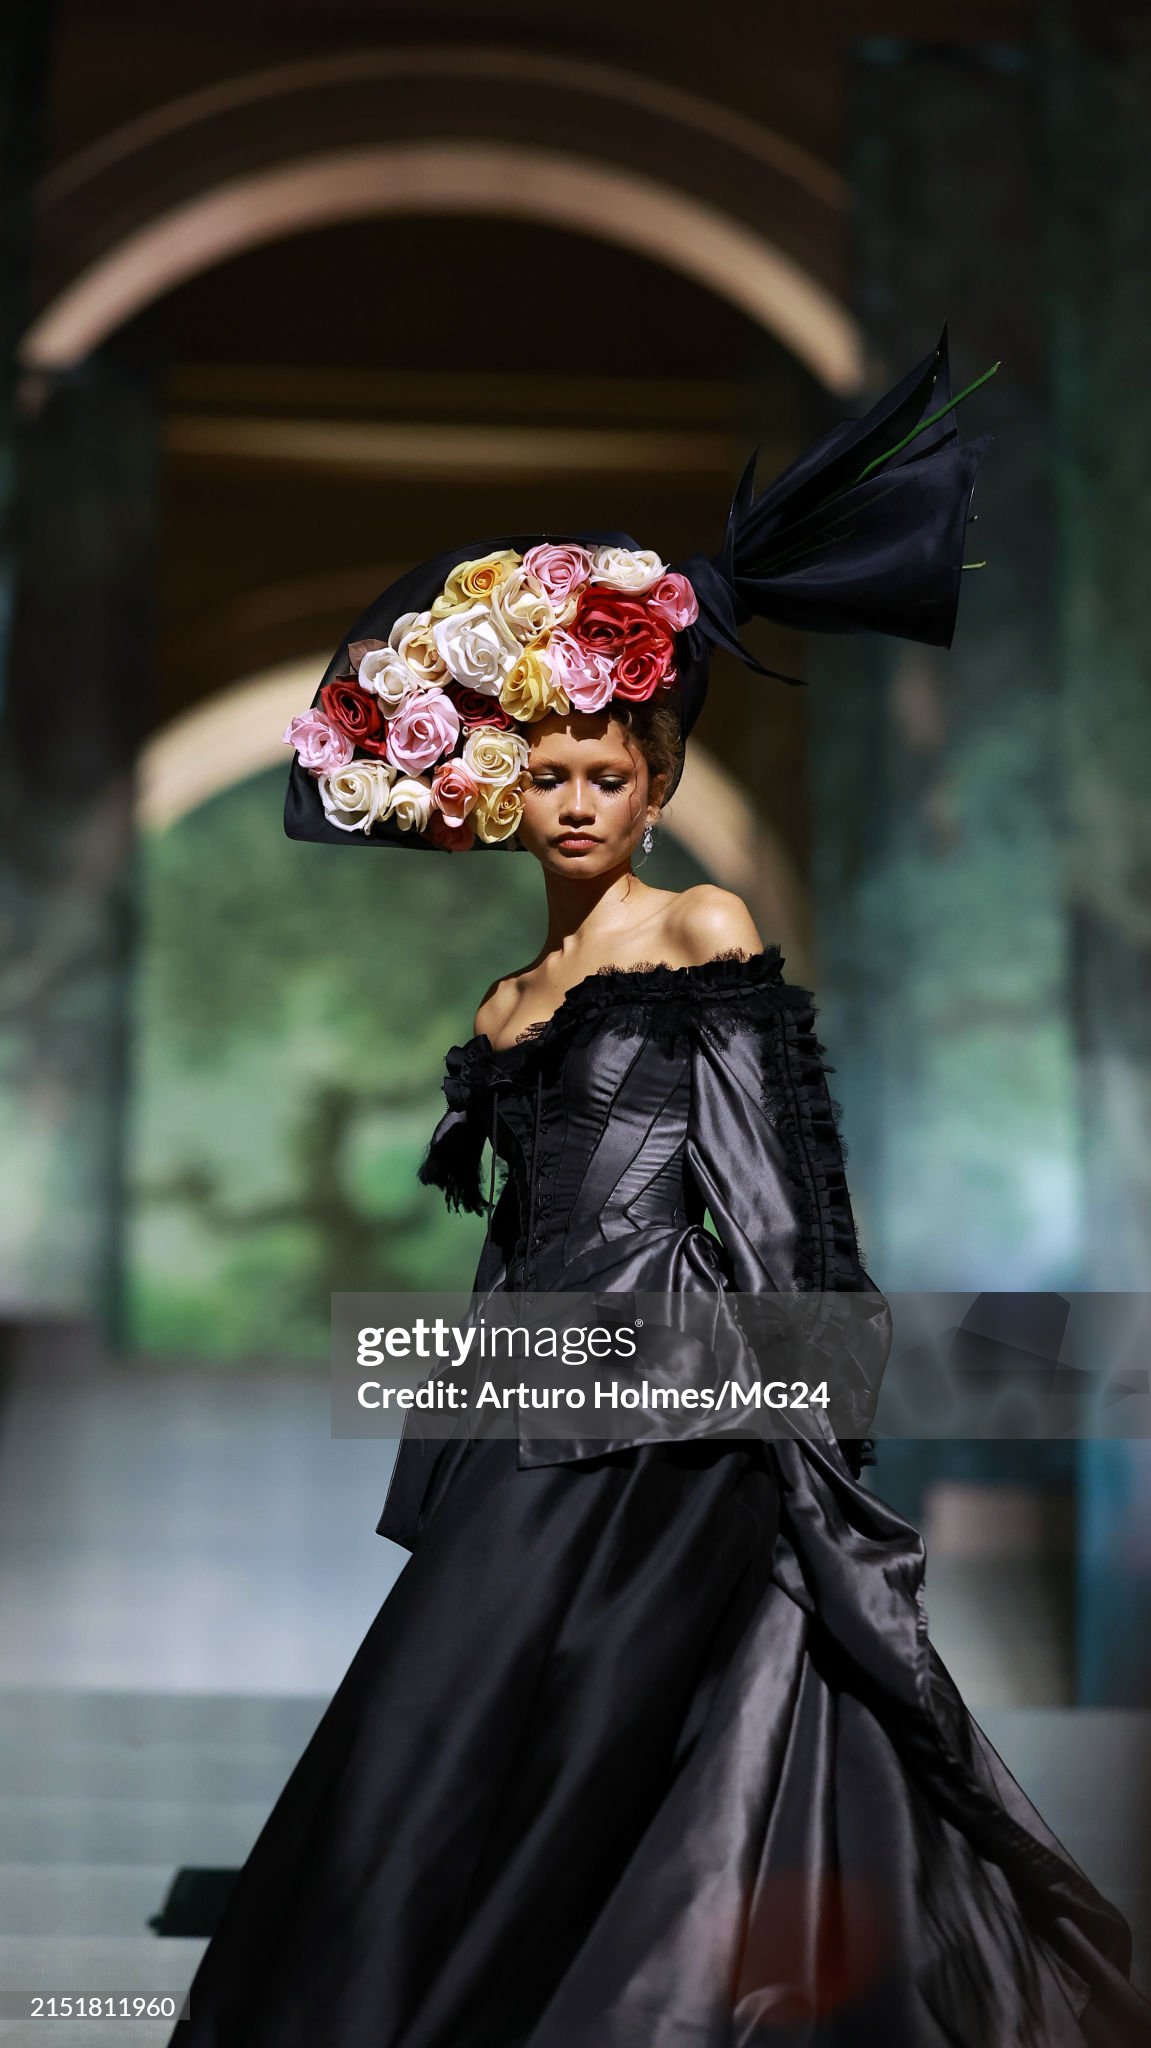 gettyimages-2151811960-2048x2048.jpg